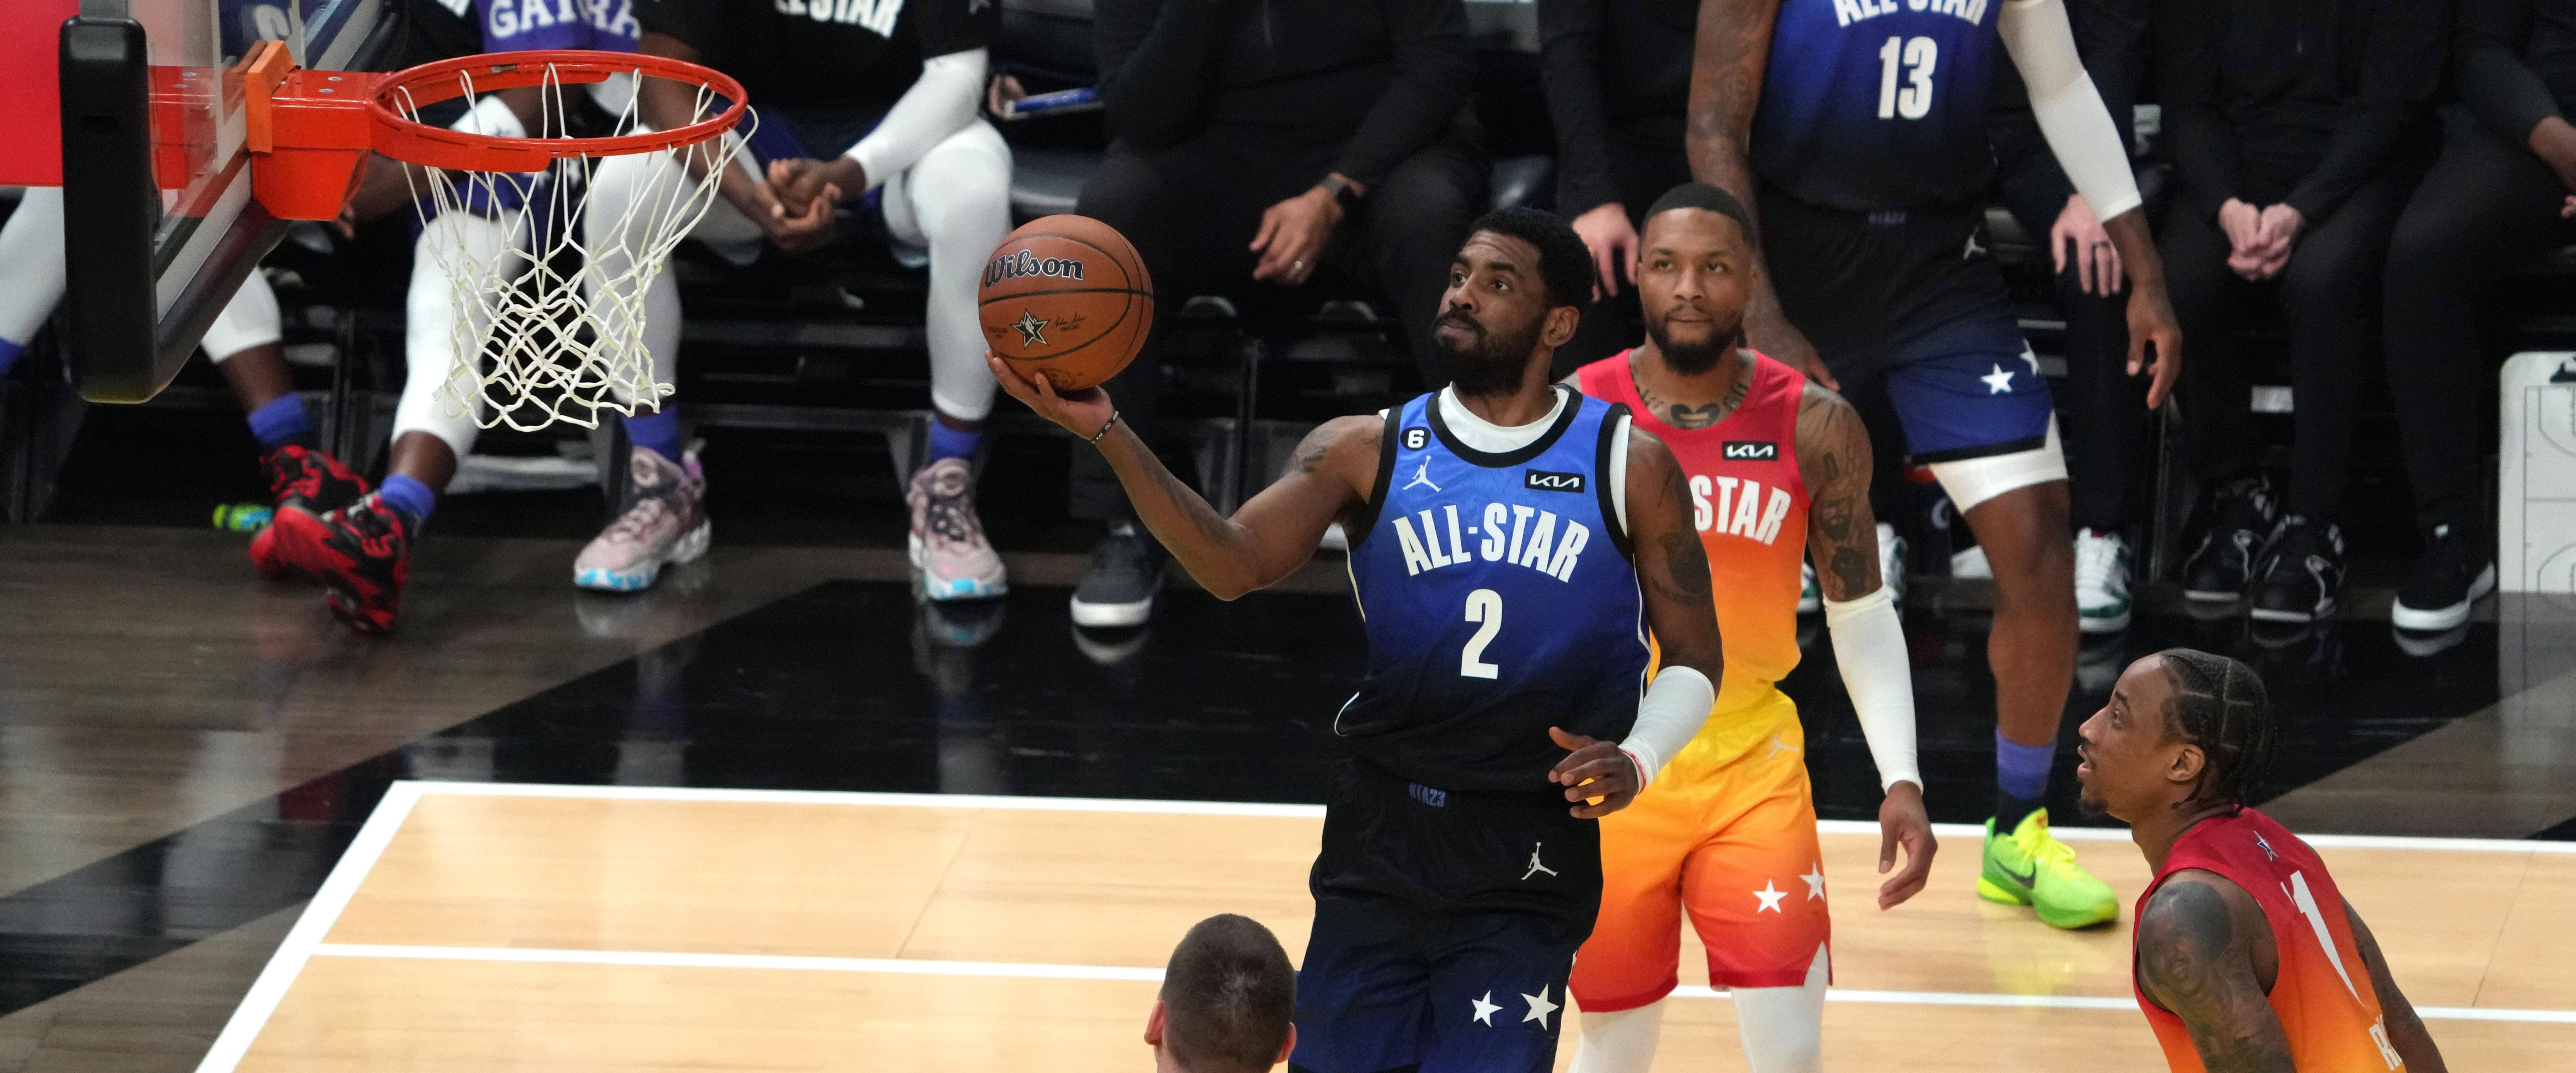 Reactions from the, 'worst basketball game ever played,': the 2023 NBA All-Star Game